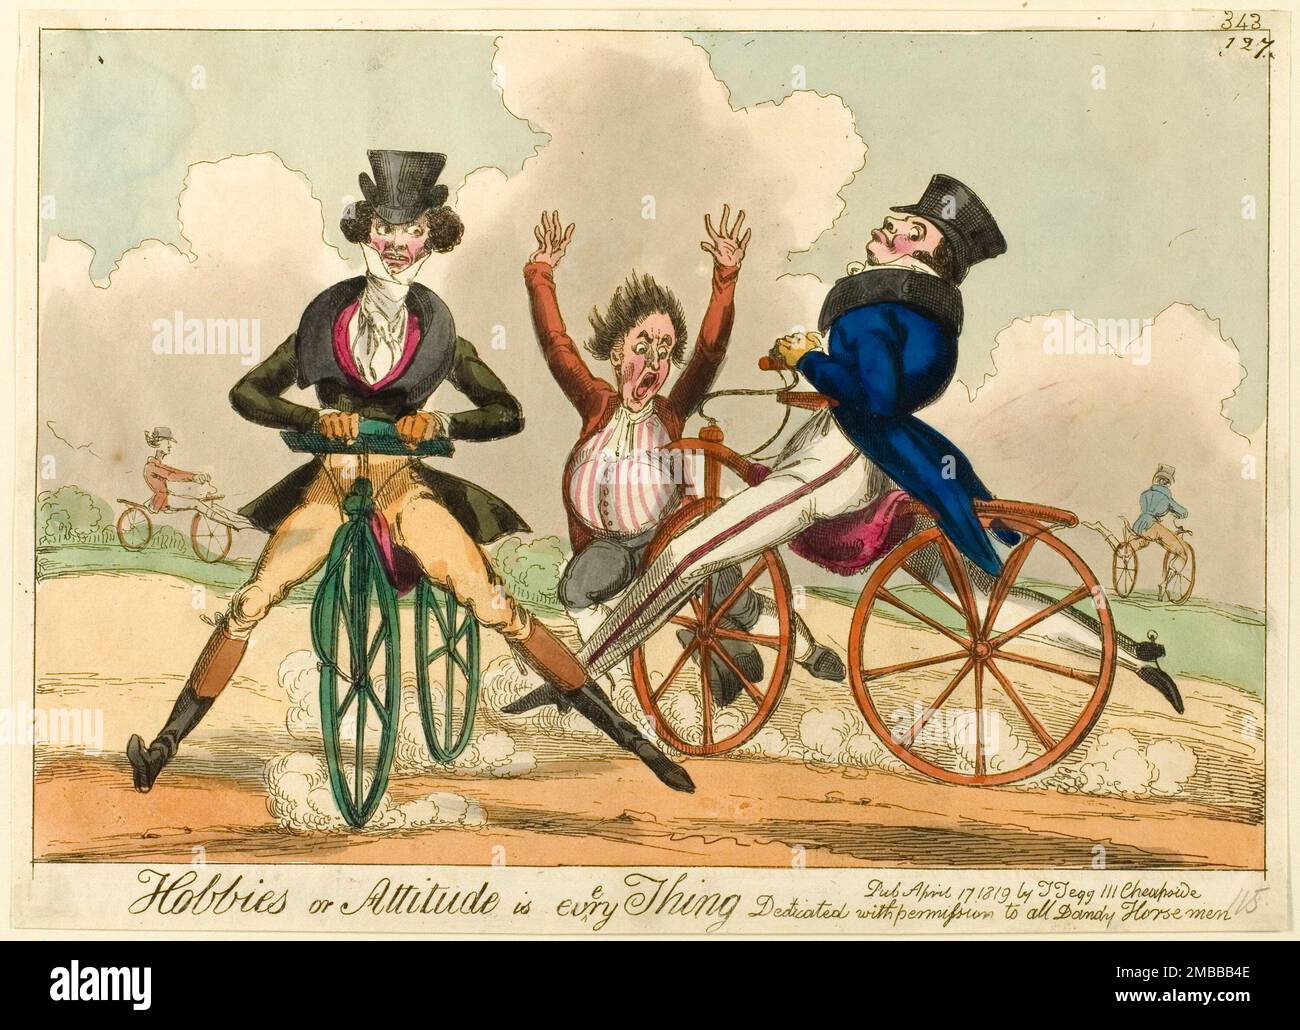 Hobbies or Attitude is Everything, Dedicated with permission to all Dandy Horsemen, published April 17, 1819. An accident involving men riding hobby horses (a forerunner of the bicycle, lacking pedals and brakes). Attributed to William Heath. Stock Photo